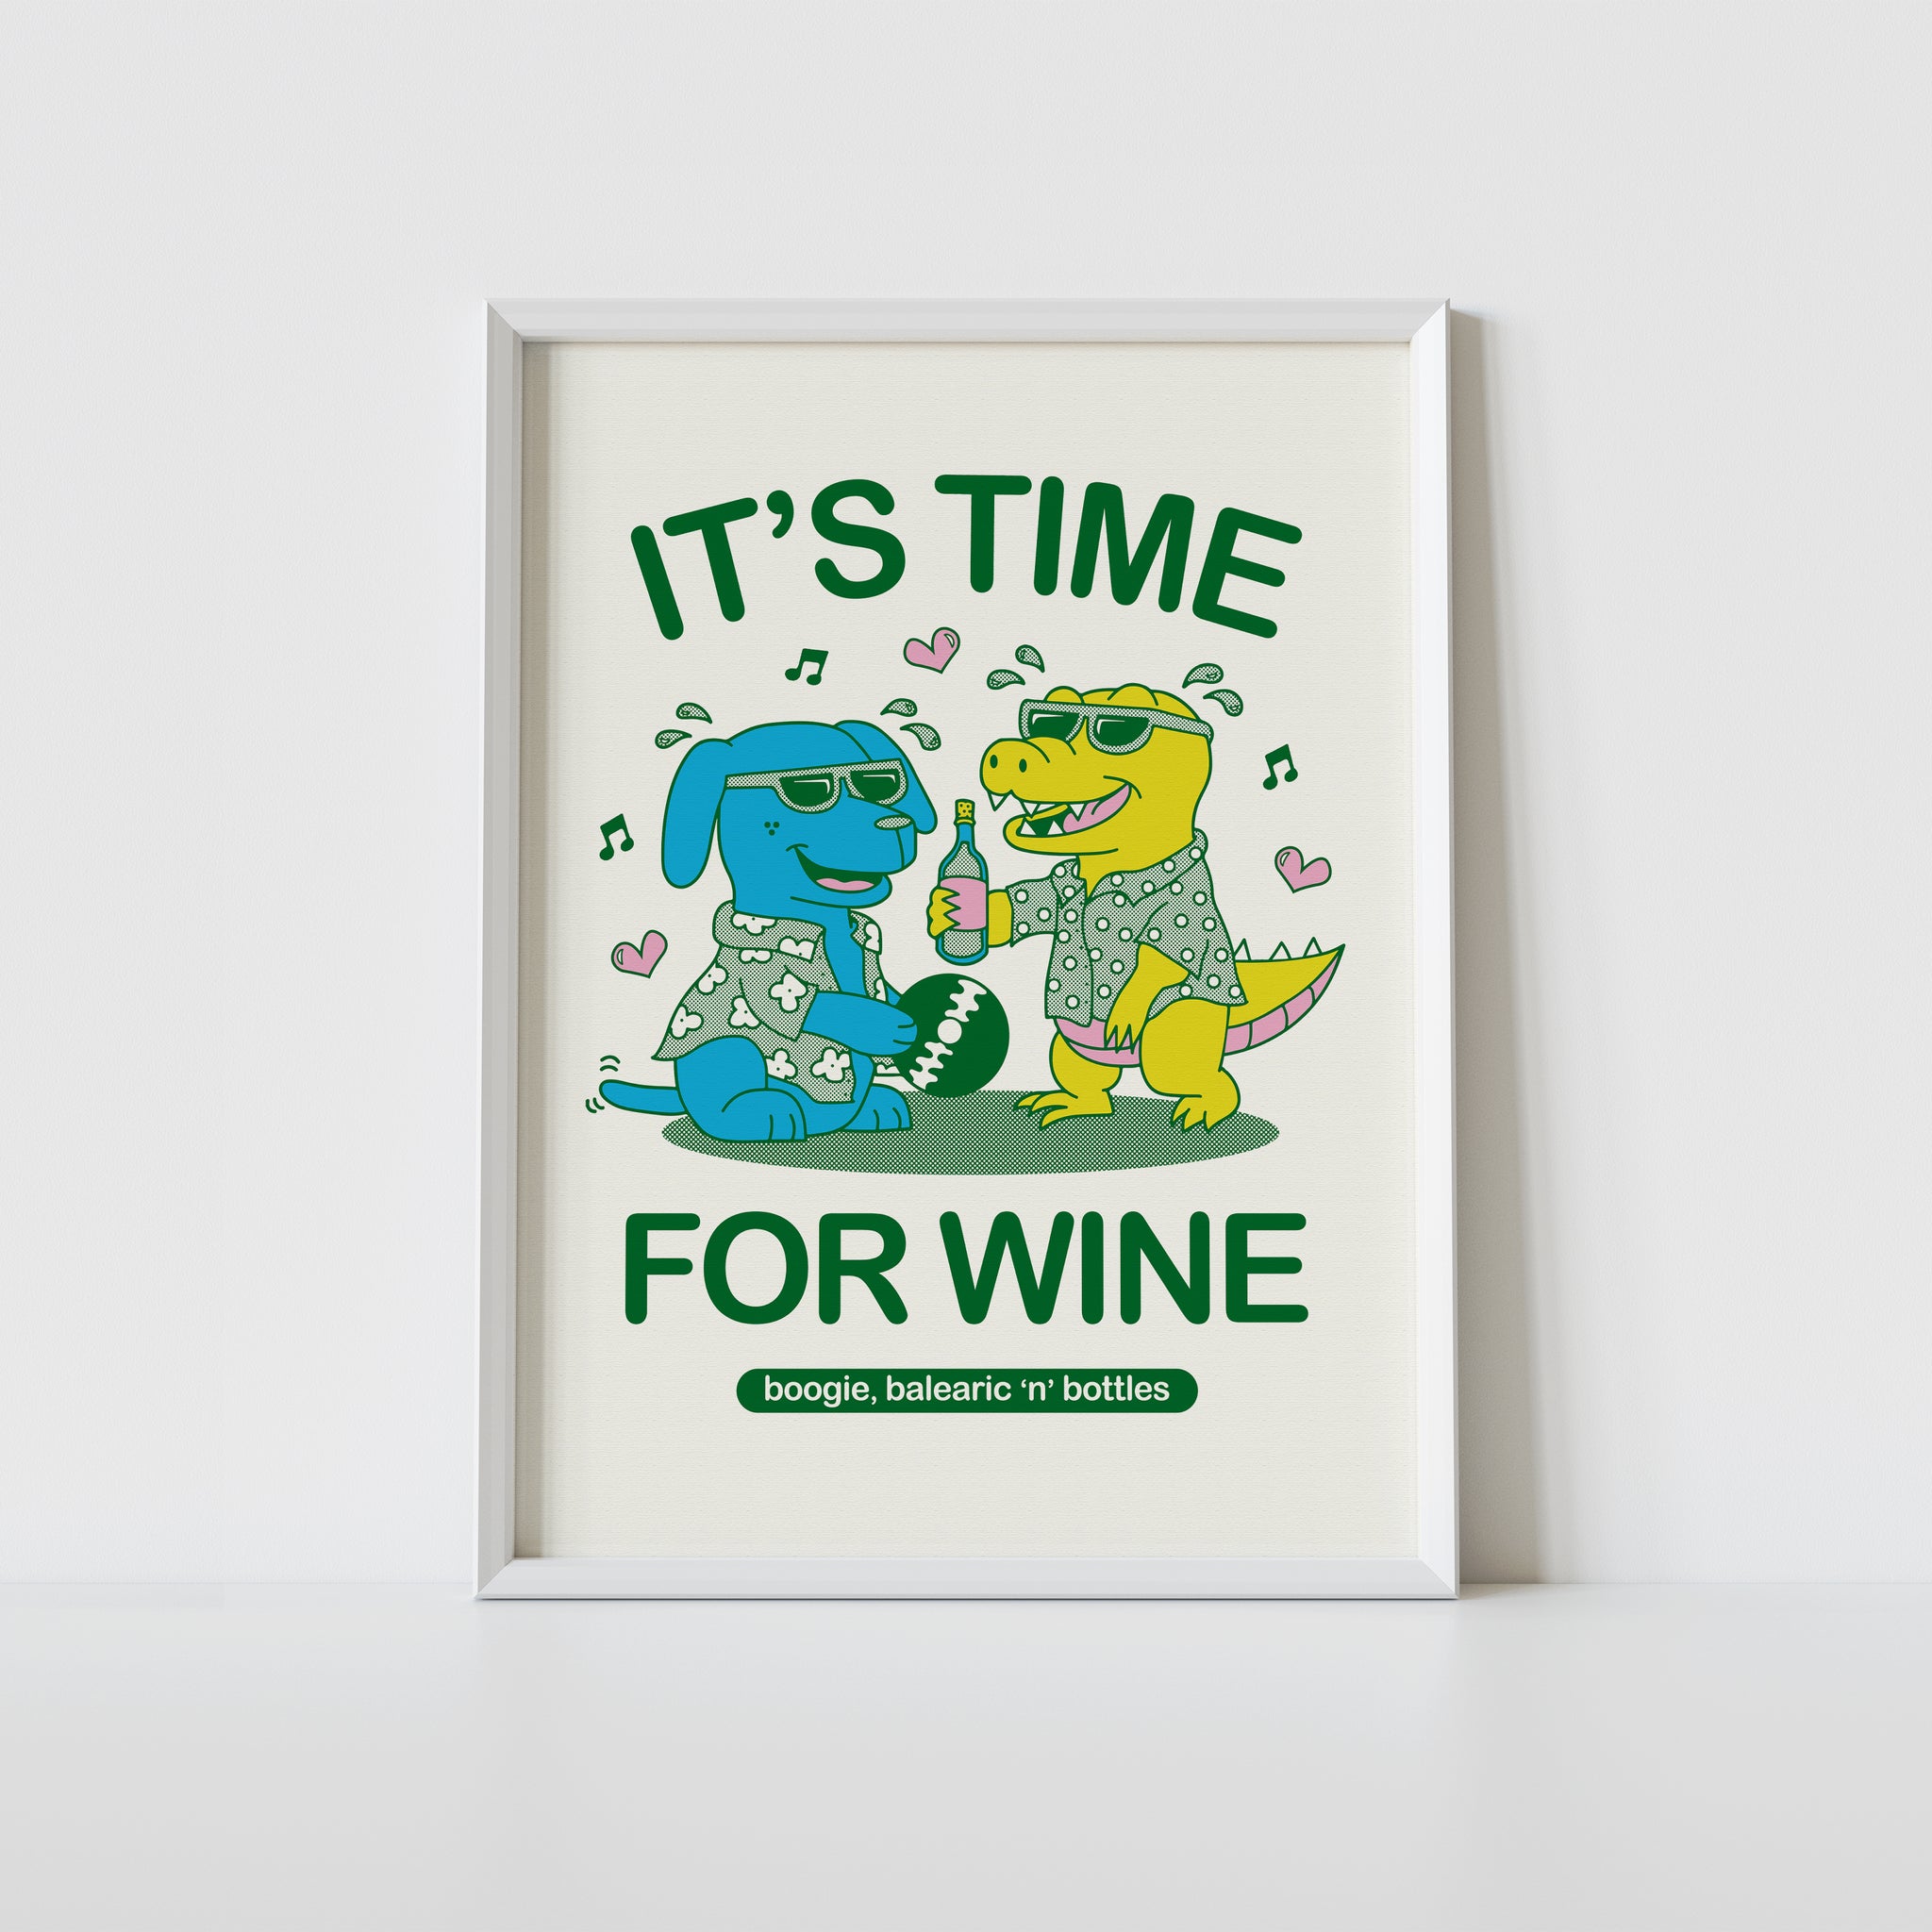 'It's Time For Wine' print